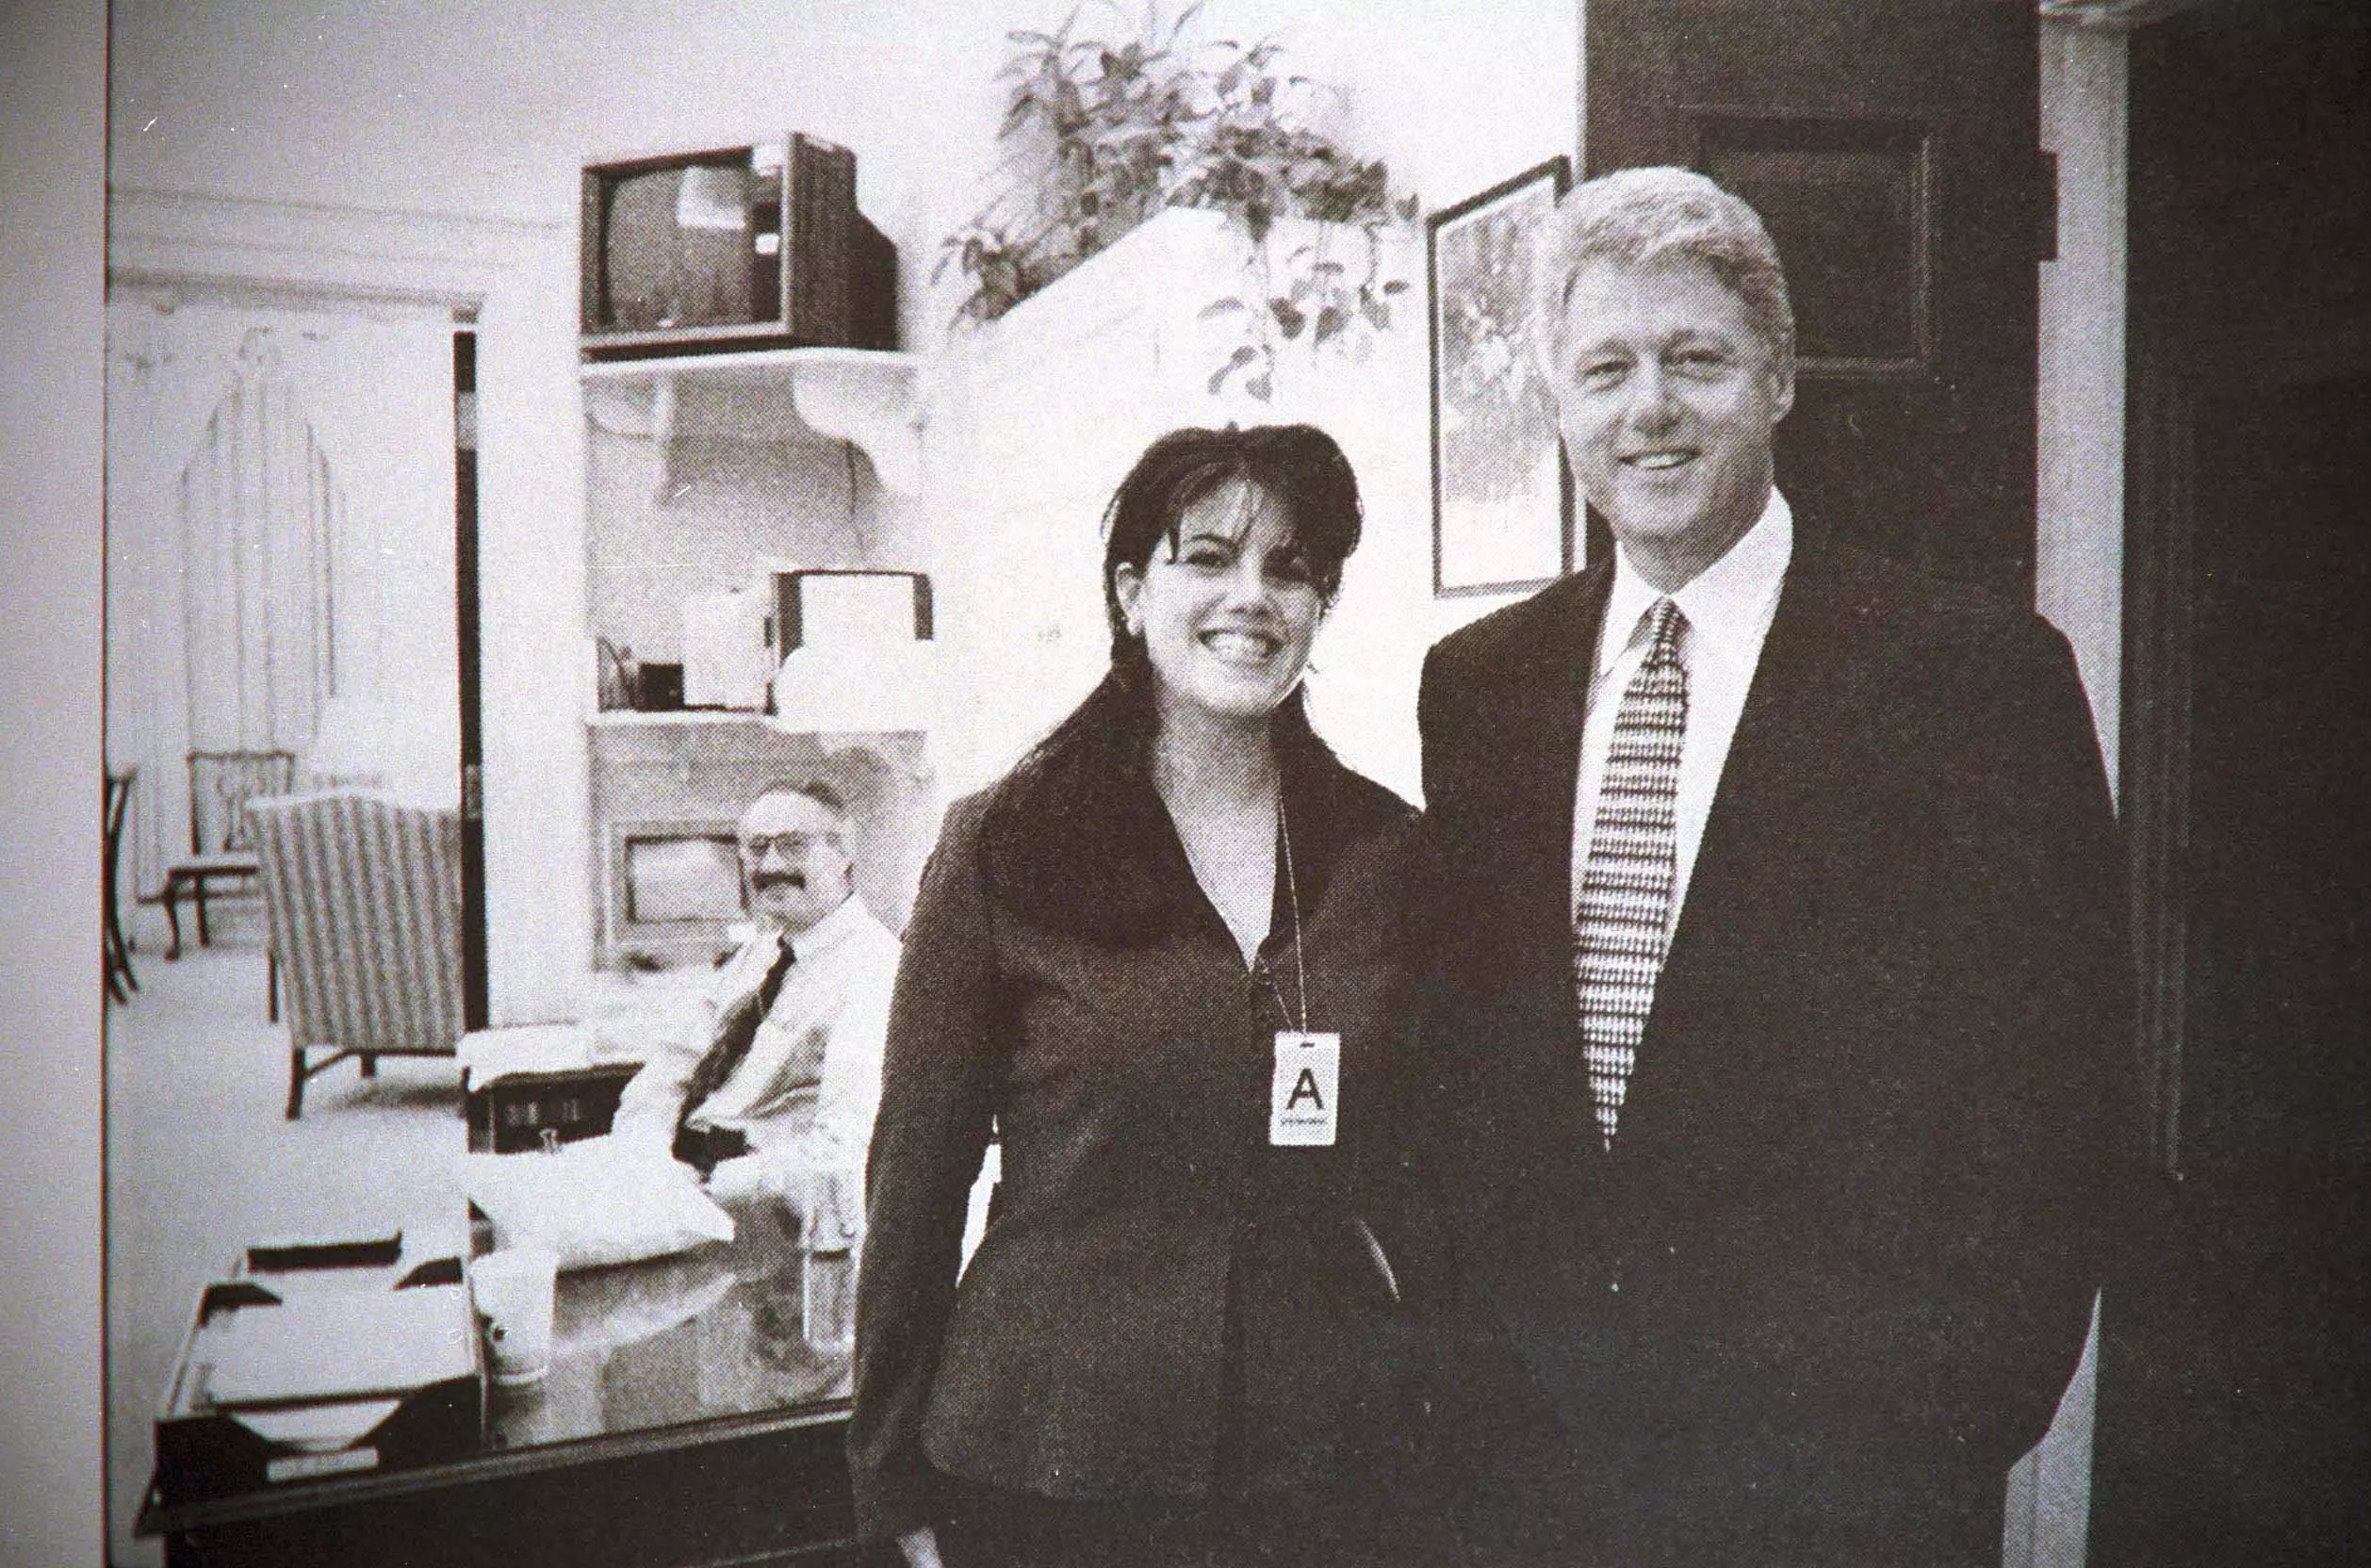 The scandal between Monica and Bill almost took down the president (